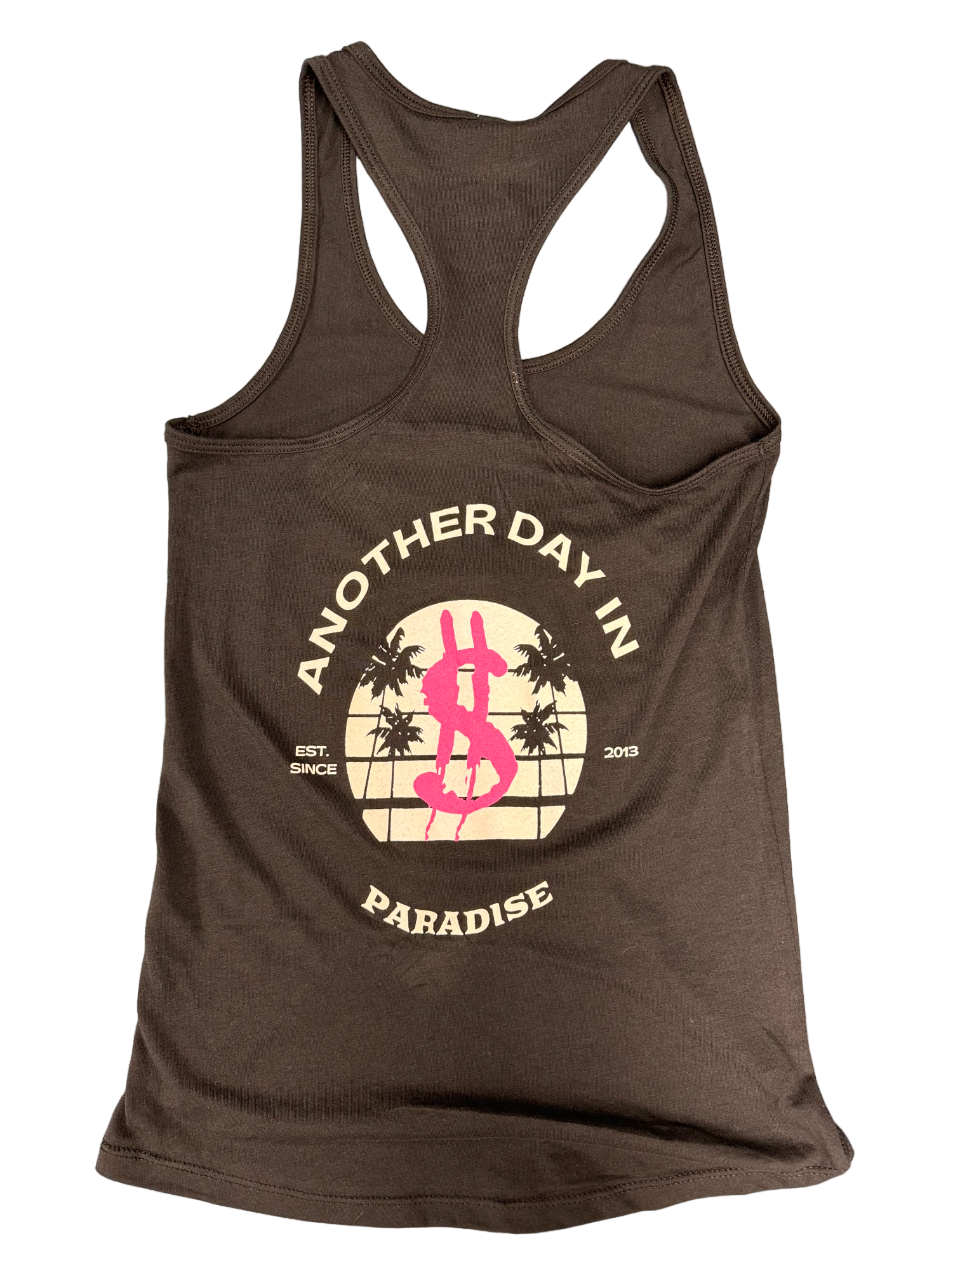 Another Day in Paradise Racerback Tank